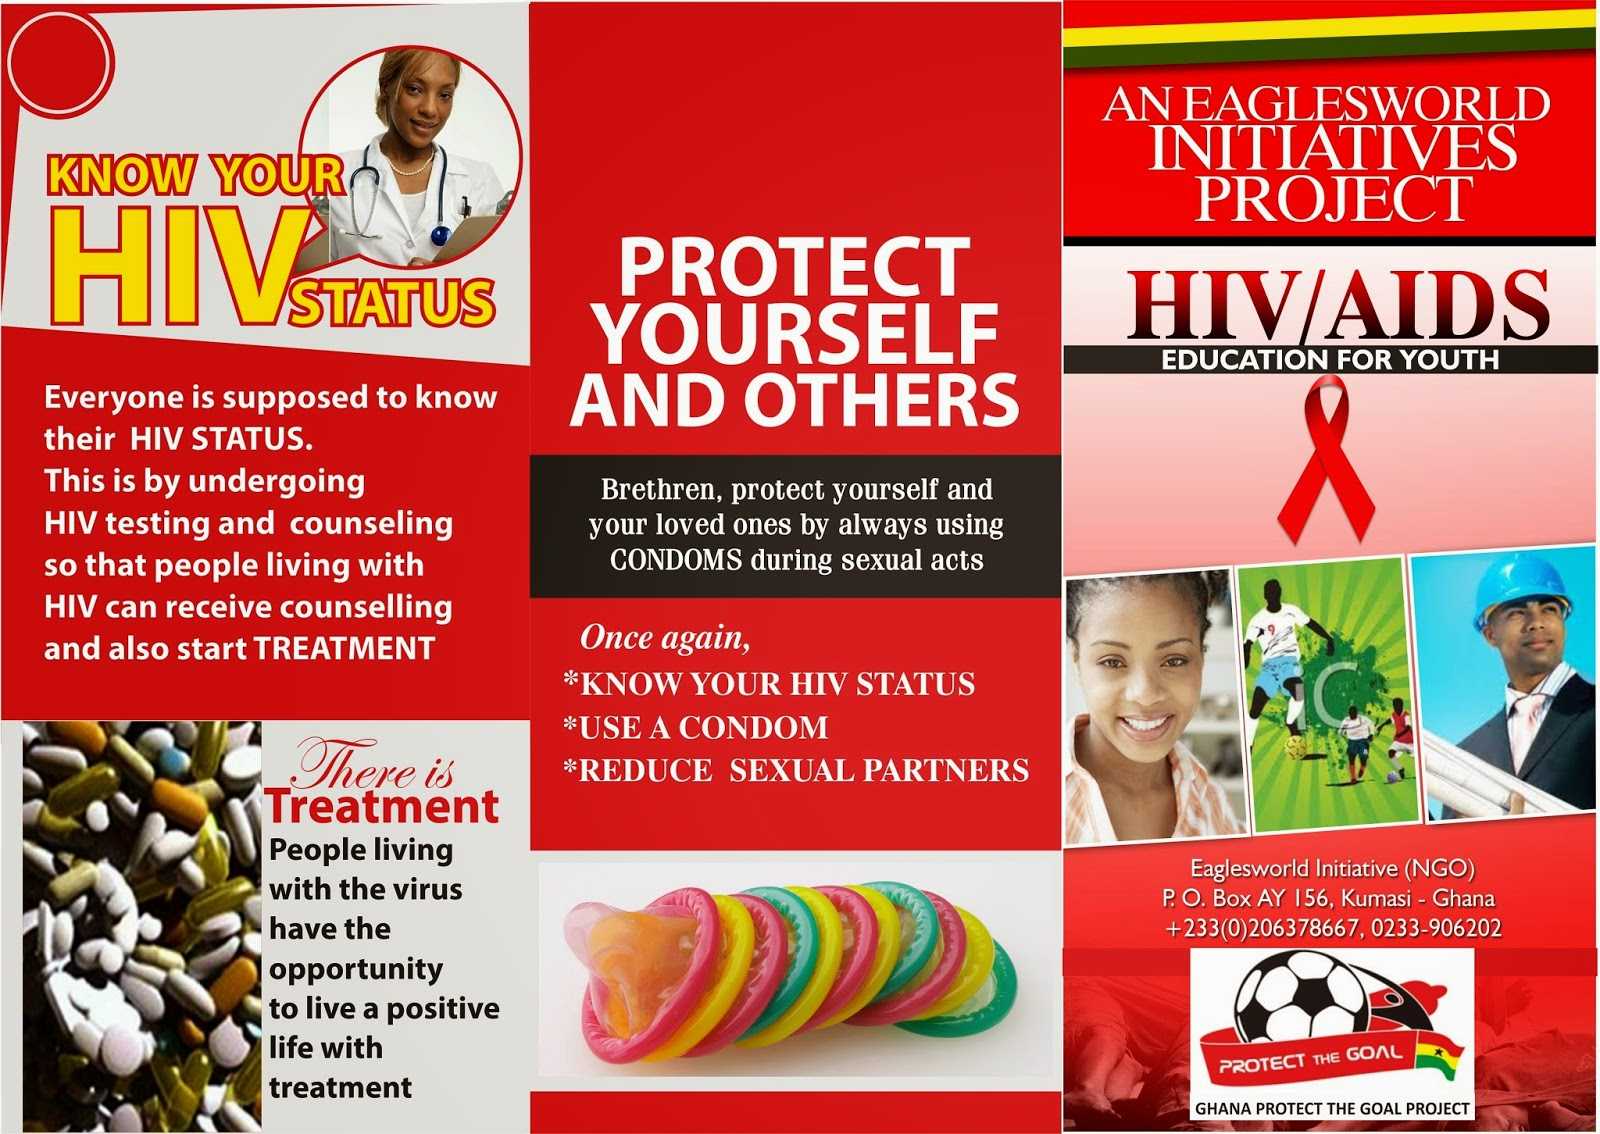 8 Best Photos Of Hiv Brochure Template - Hiv Aids Brochure Intended For Hiv Aids Brochure Templates